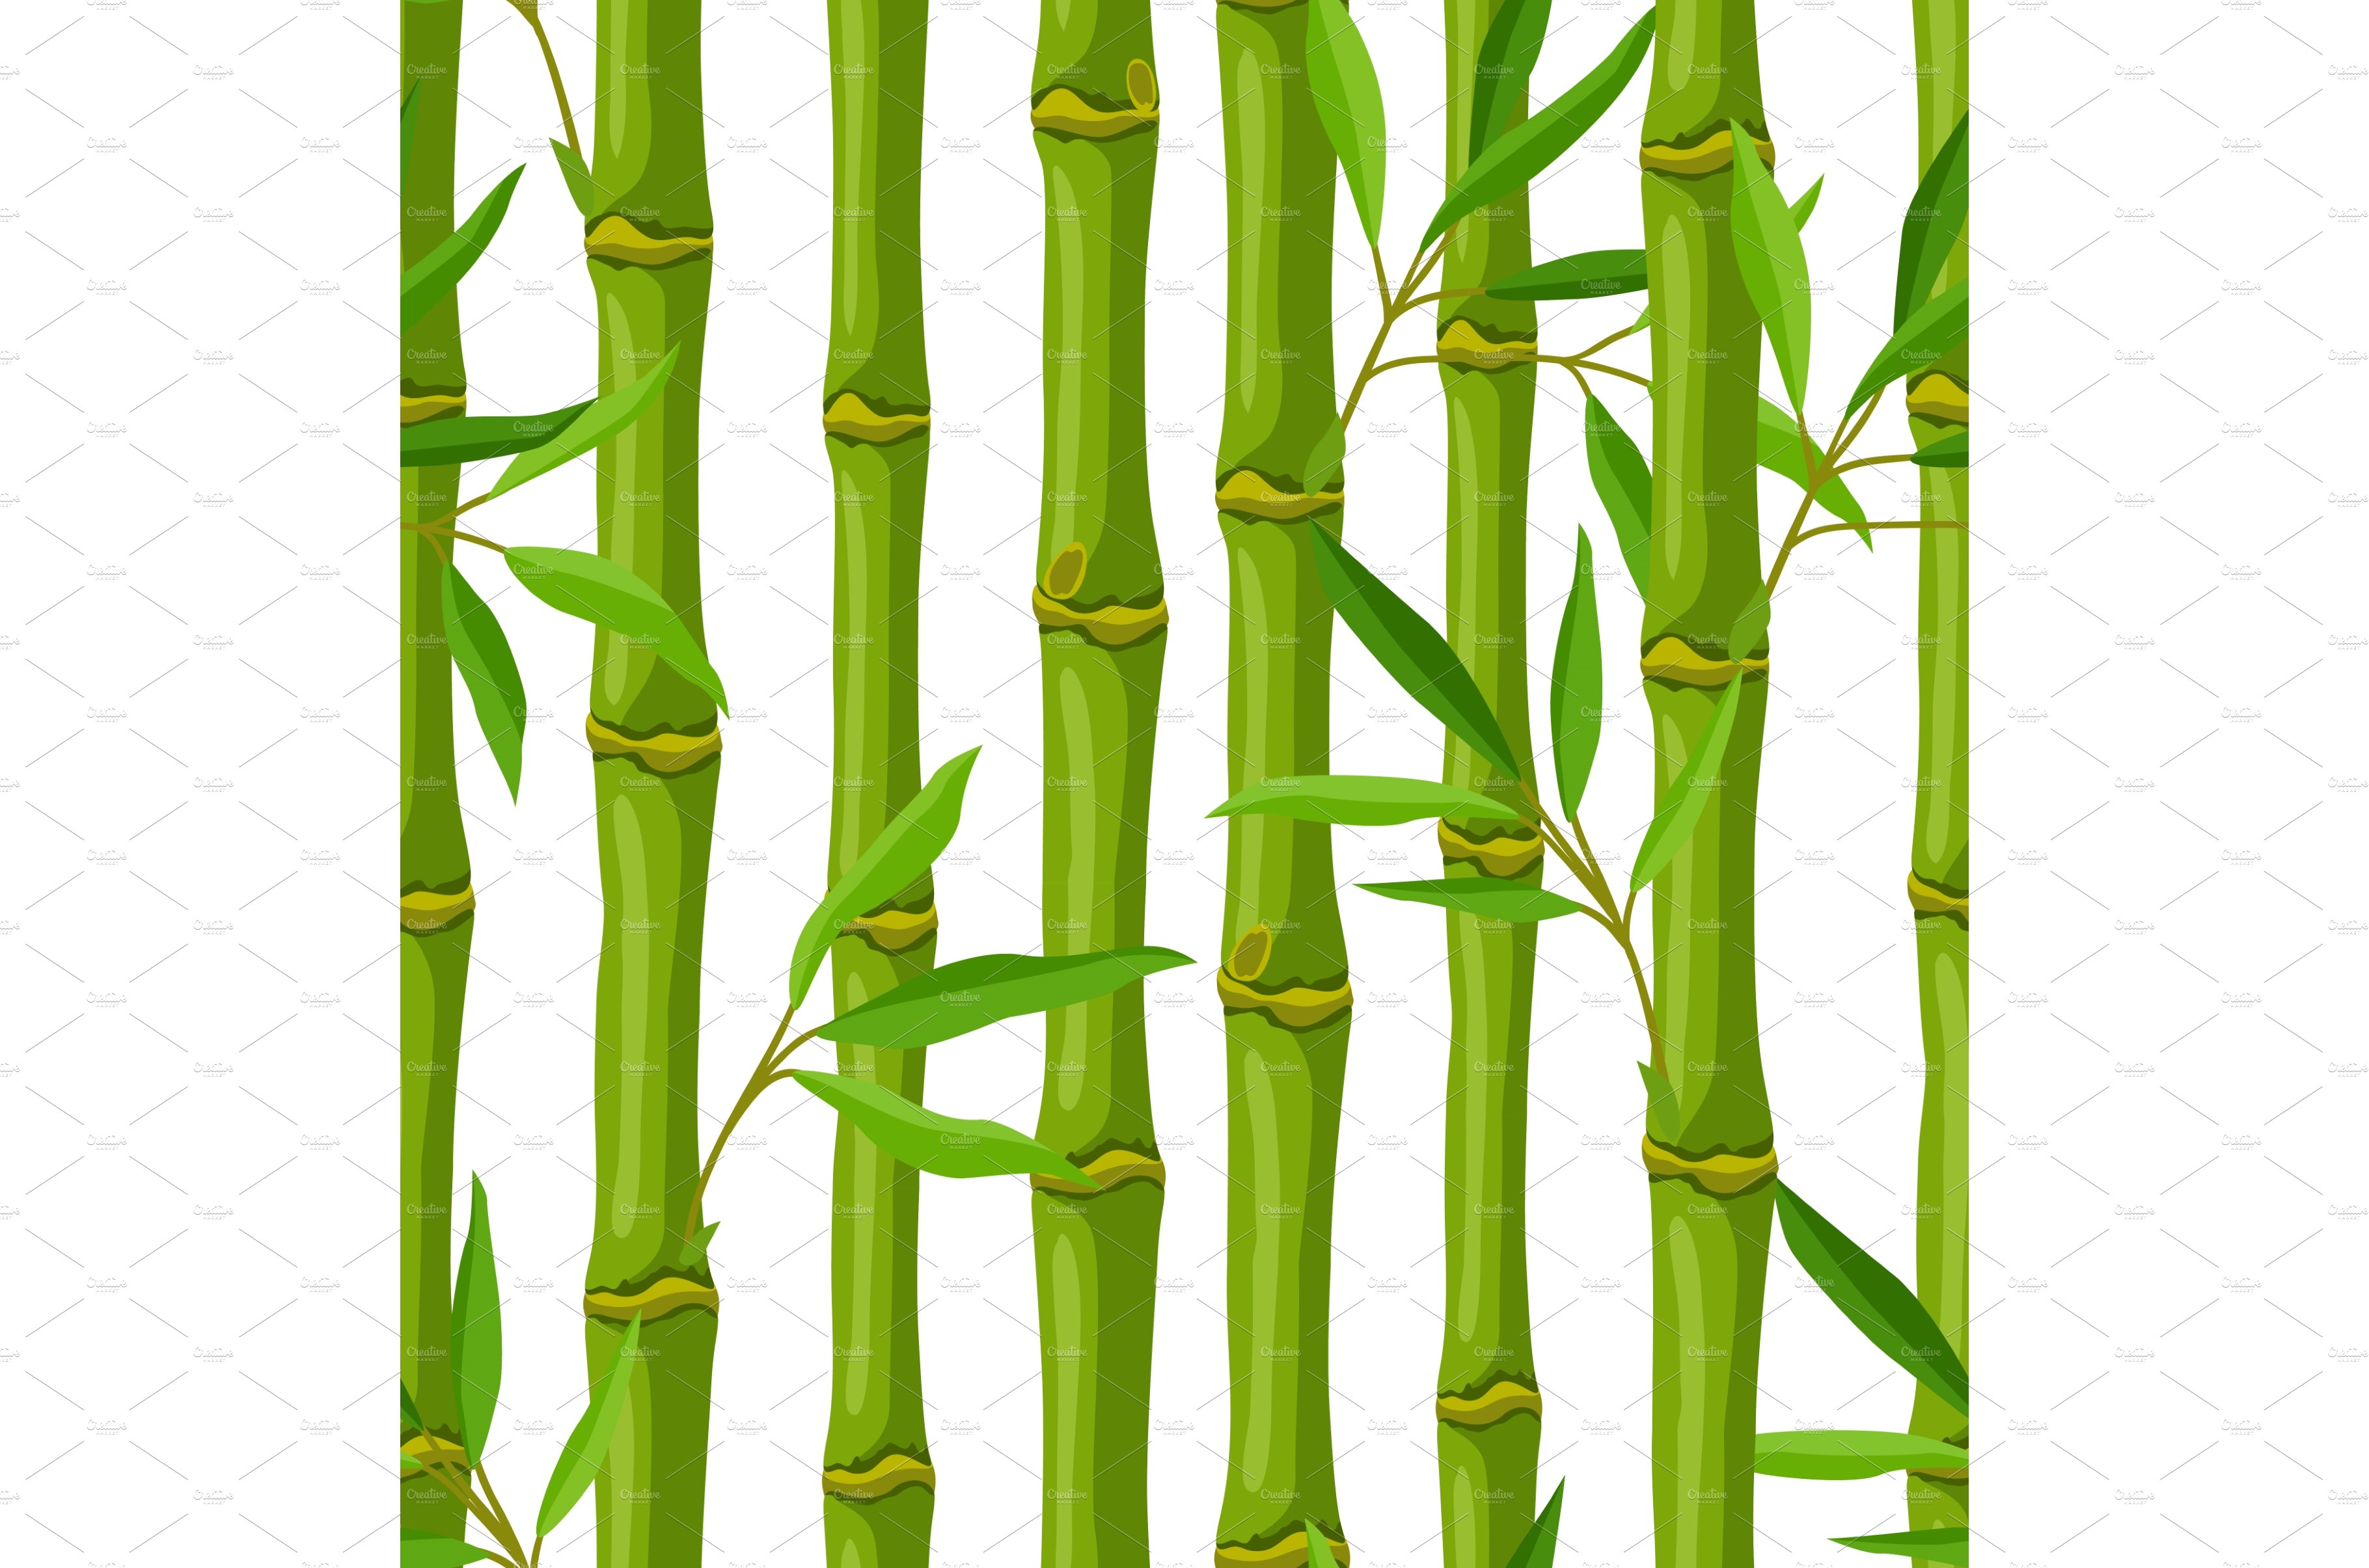 Picture of a bamboo tree with green leaves.